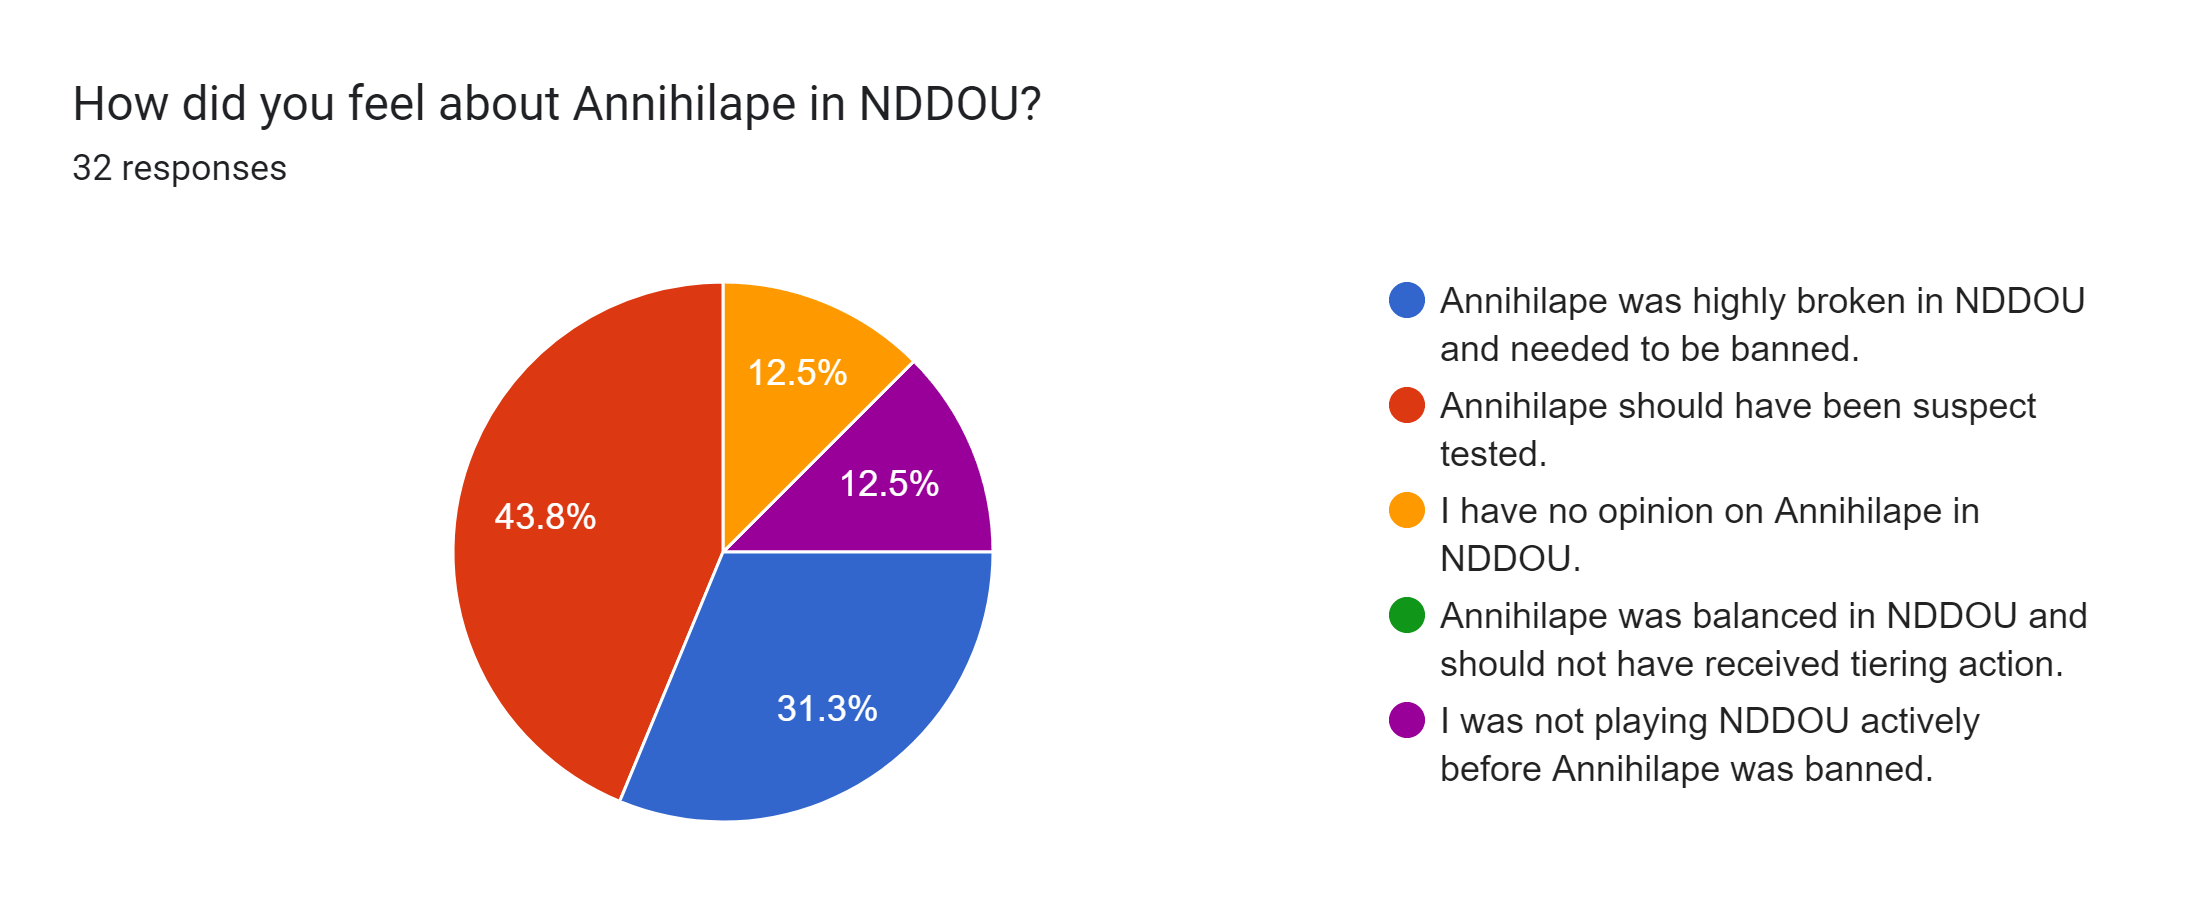 Forms response chart. Question title: How did you feel about Annihilape in NDDOU?. Number of responses: 32 responses.